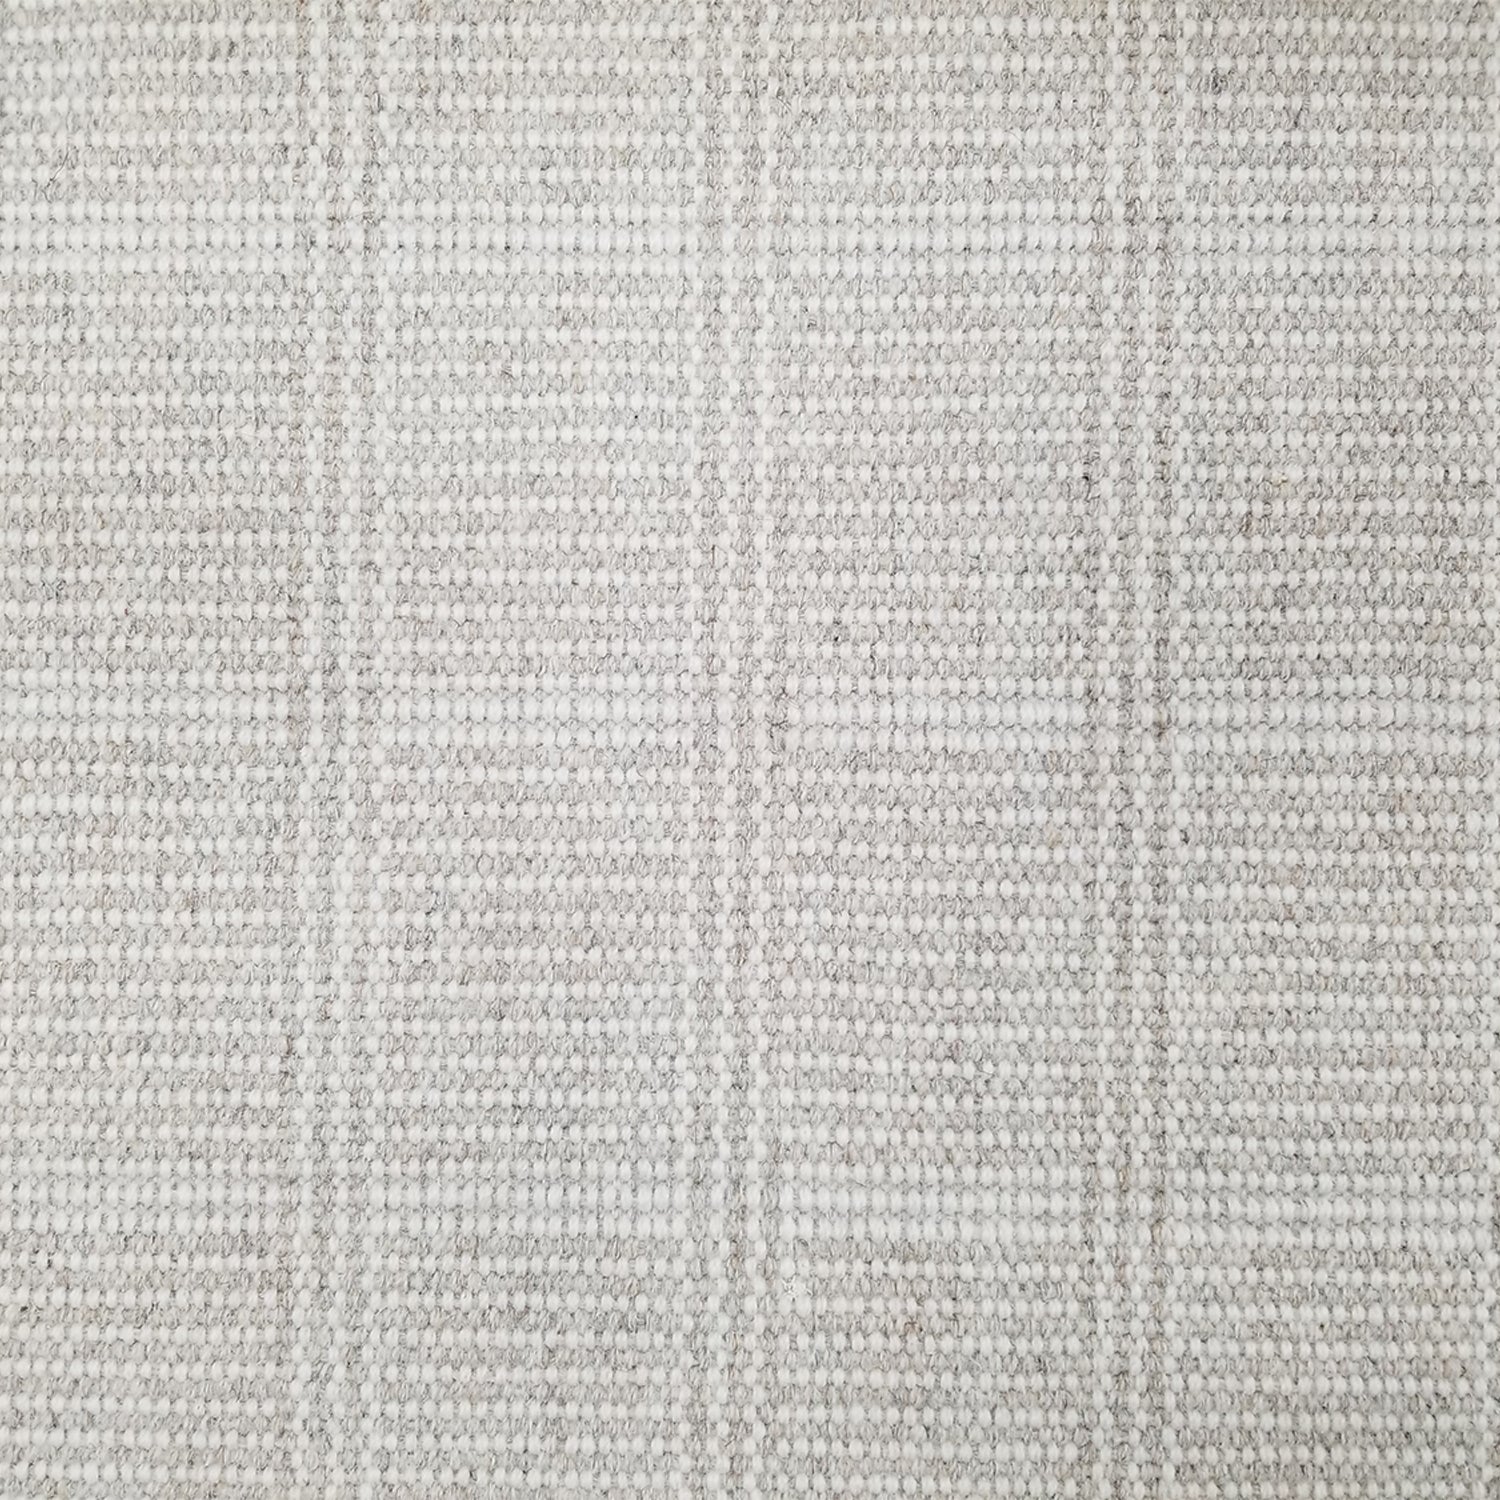 Wool broadloom carpet swatch in a plaid print in shades of light gray and cream.